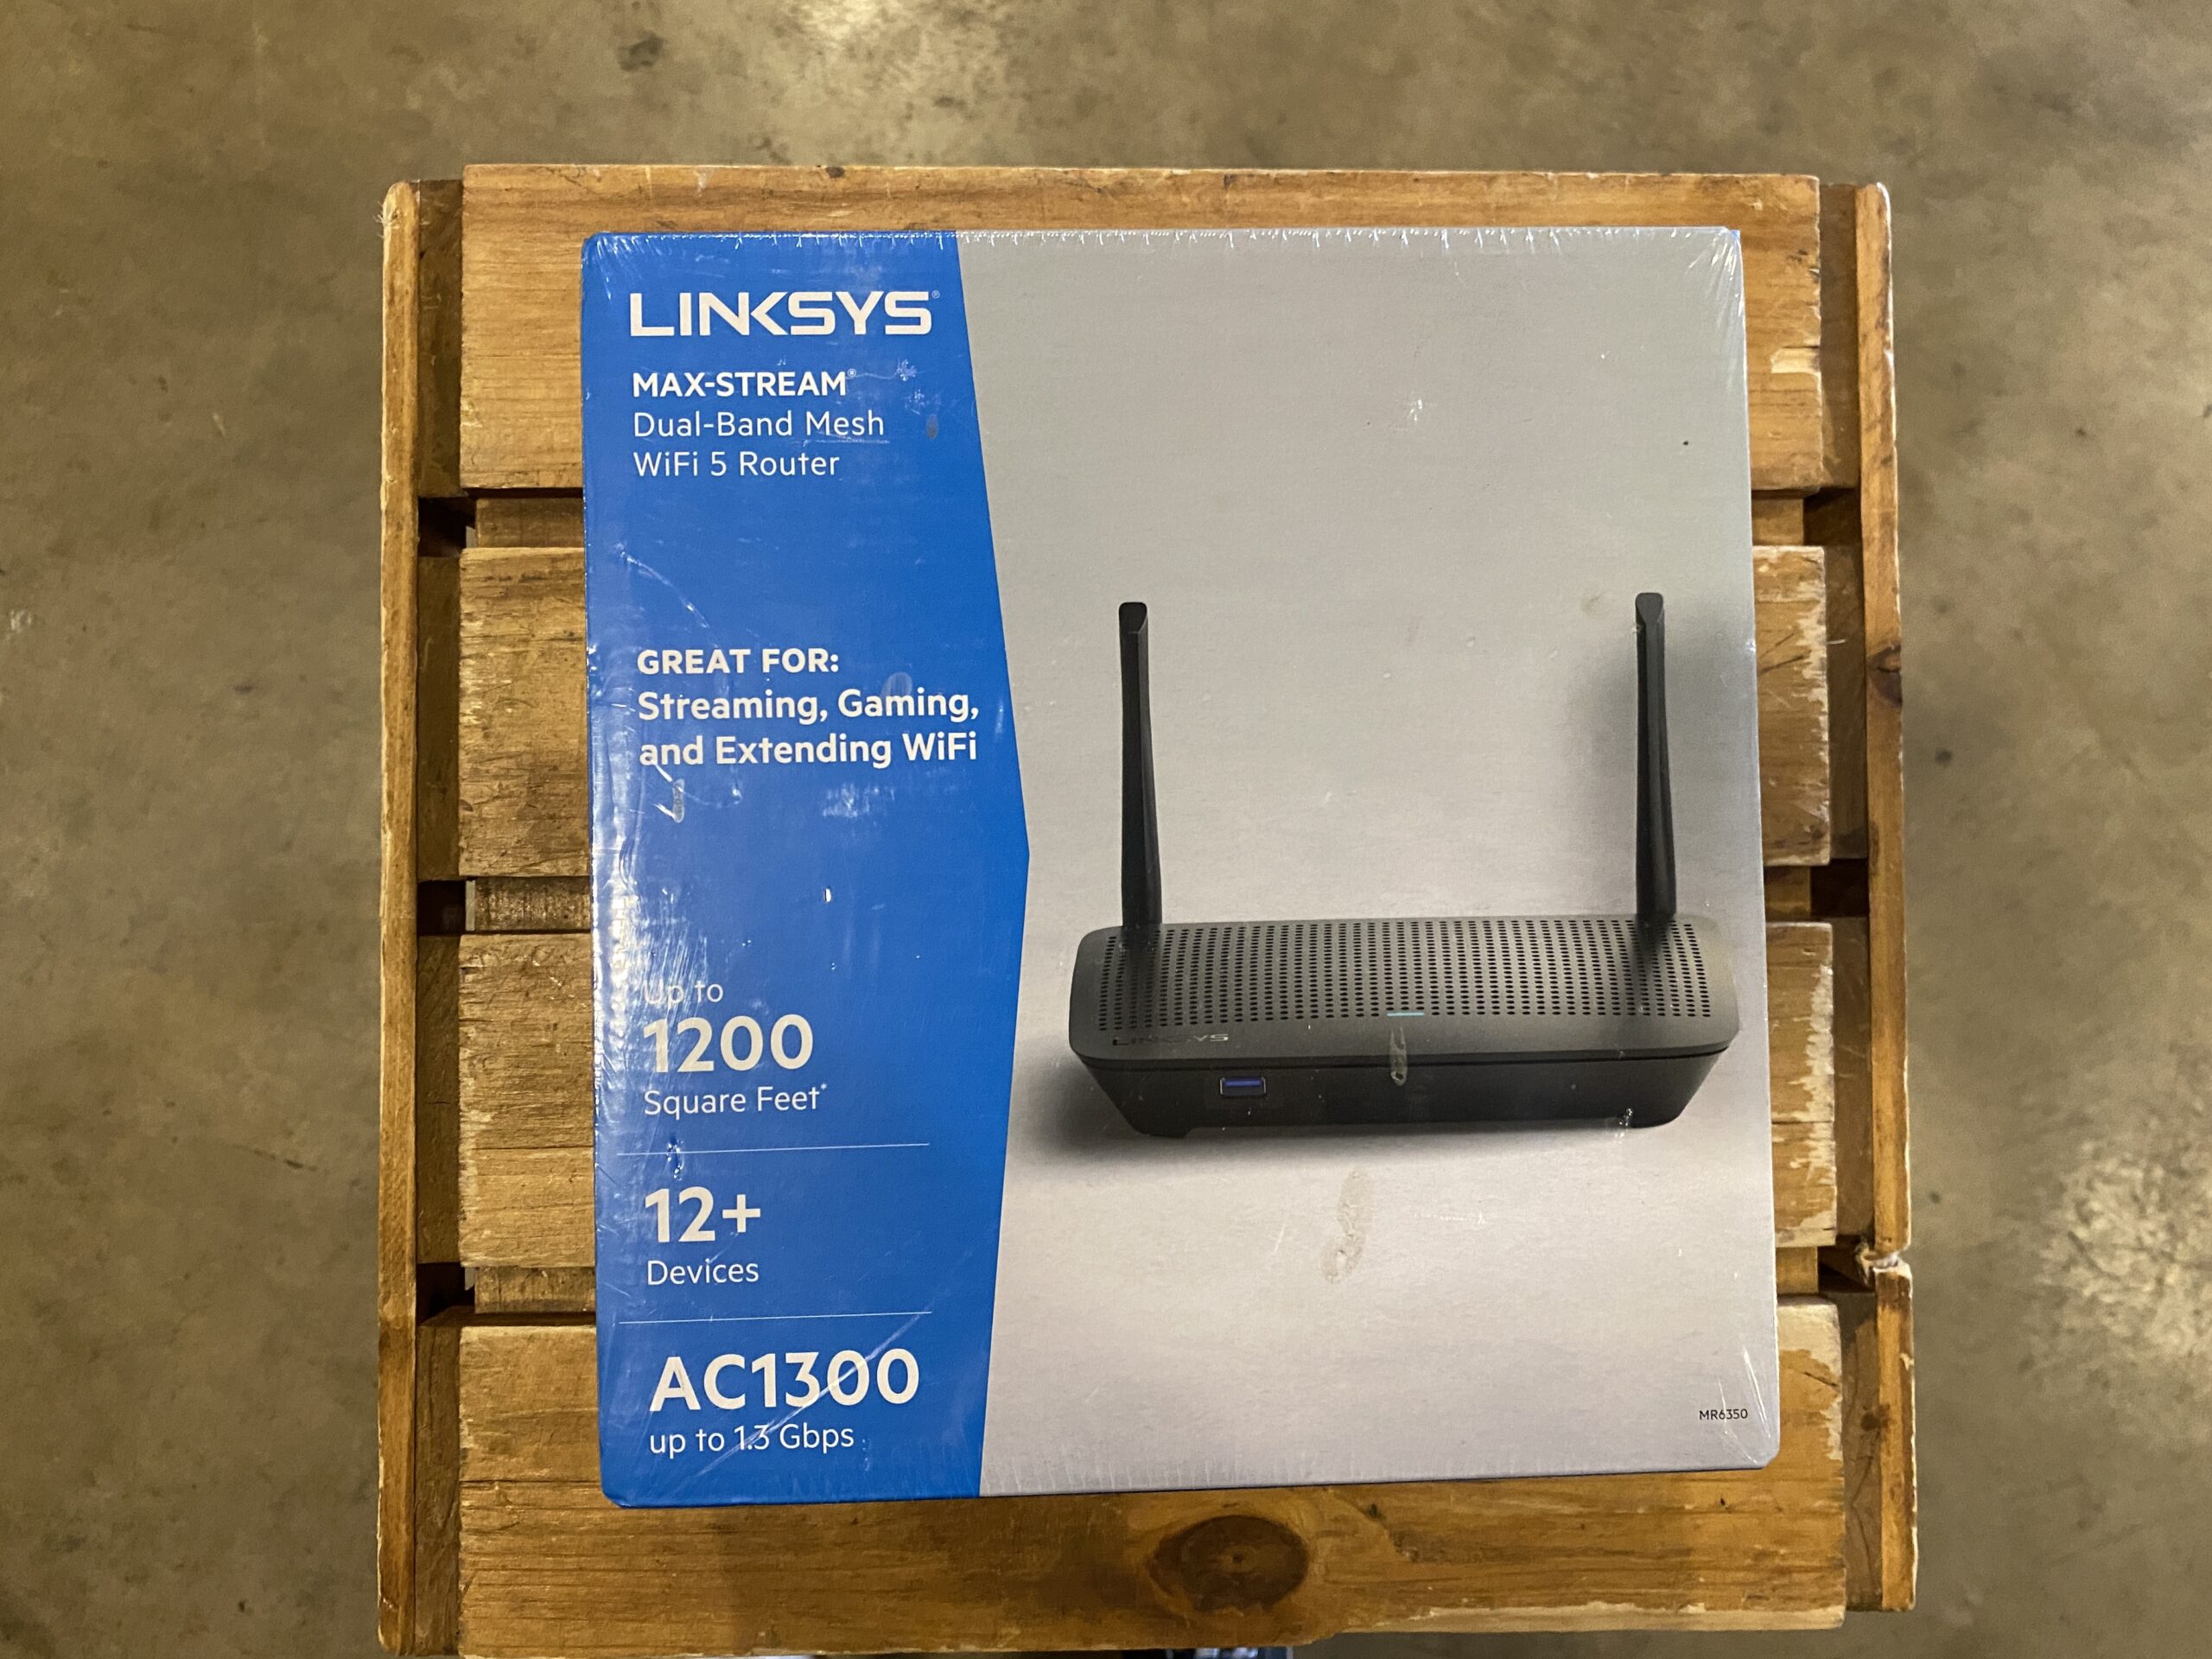 NEW! LINKSYS Max-Stream Dual-Band Mesh WiFi 5 Router